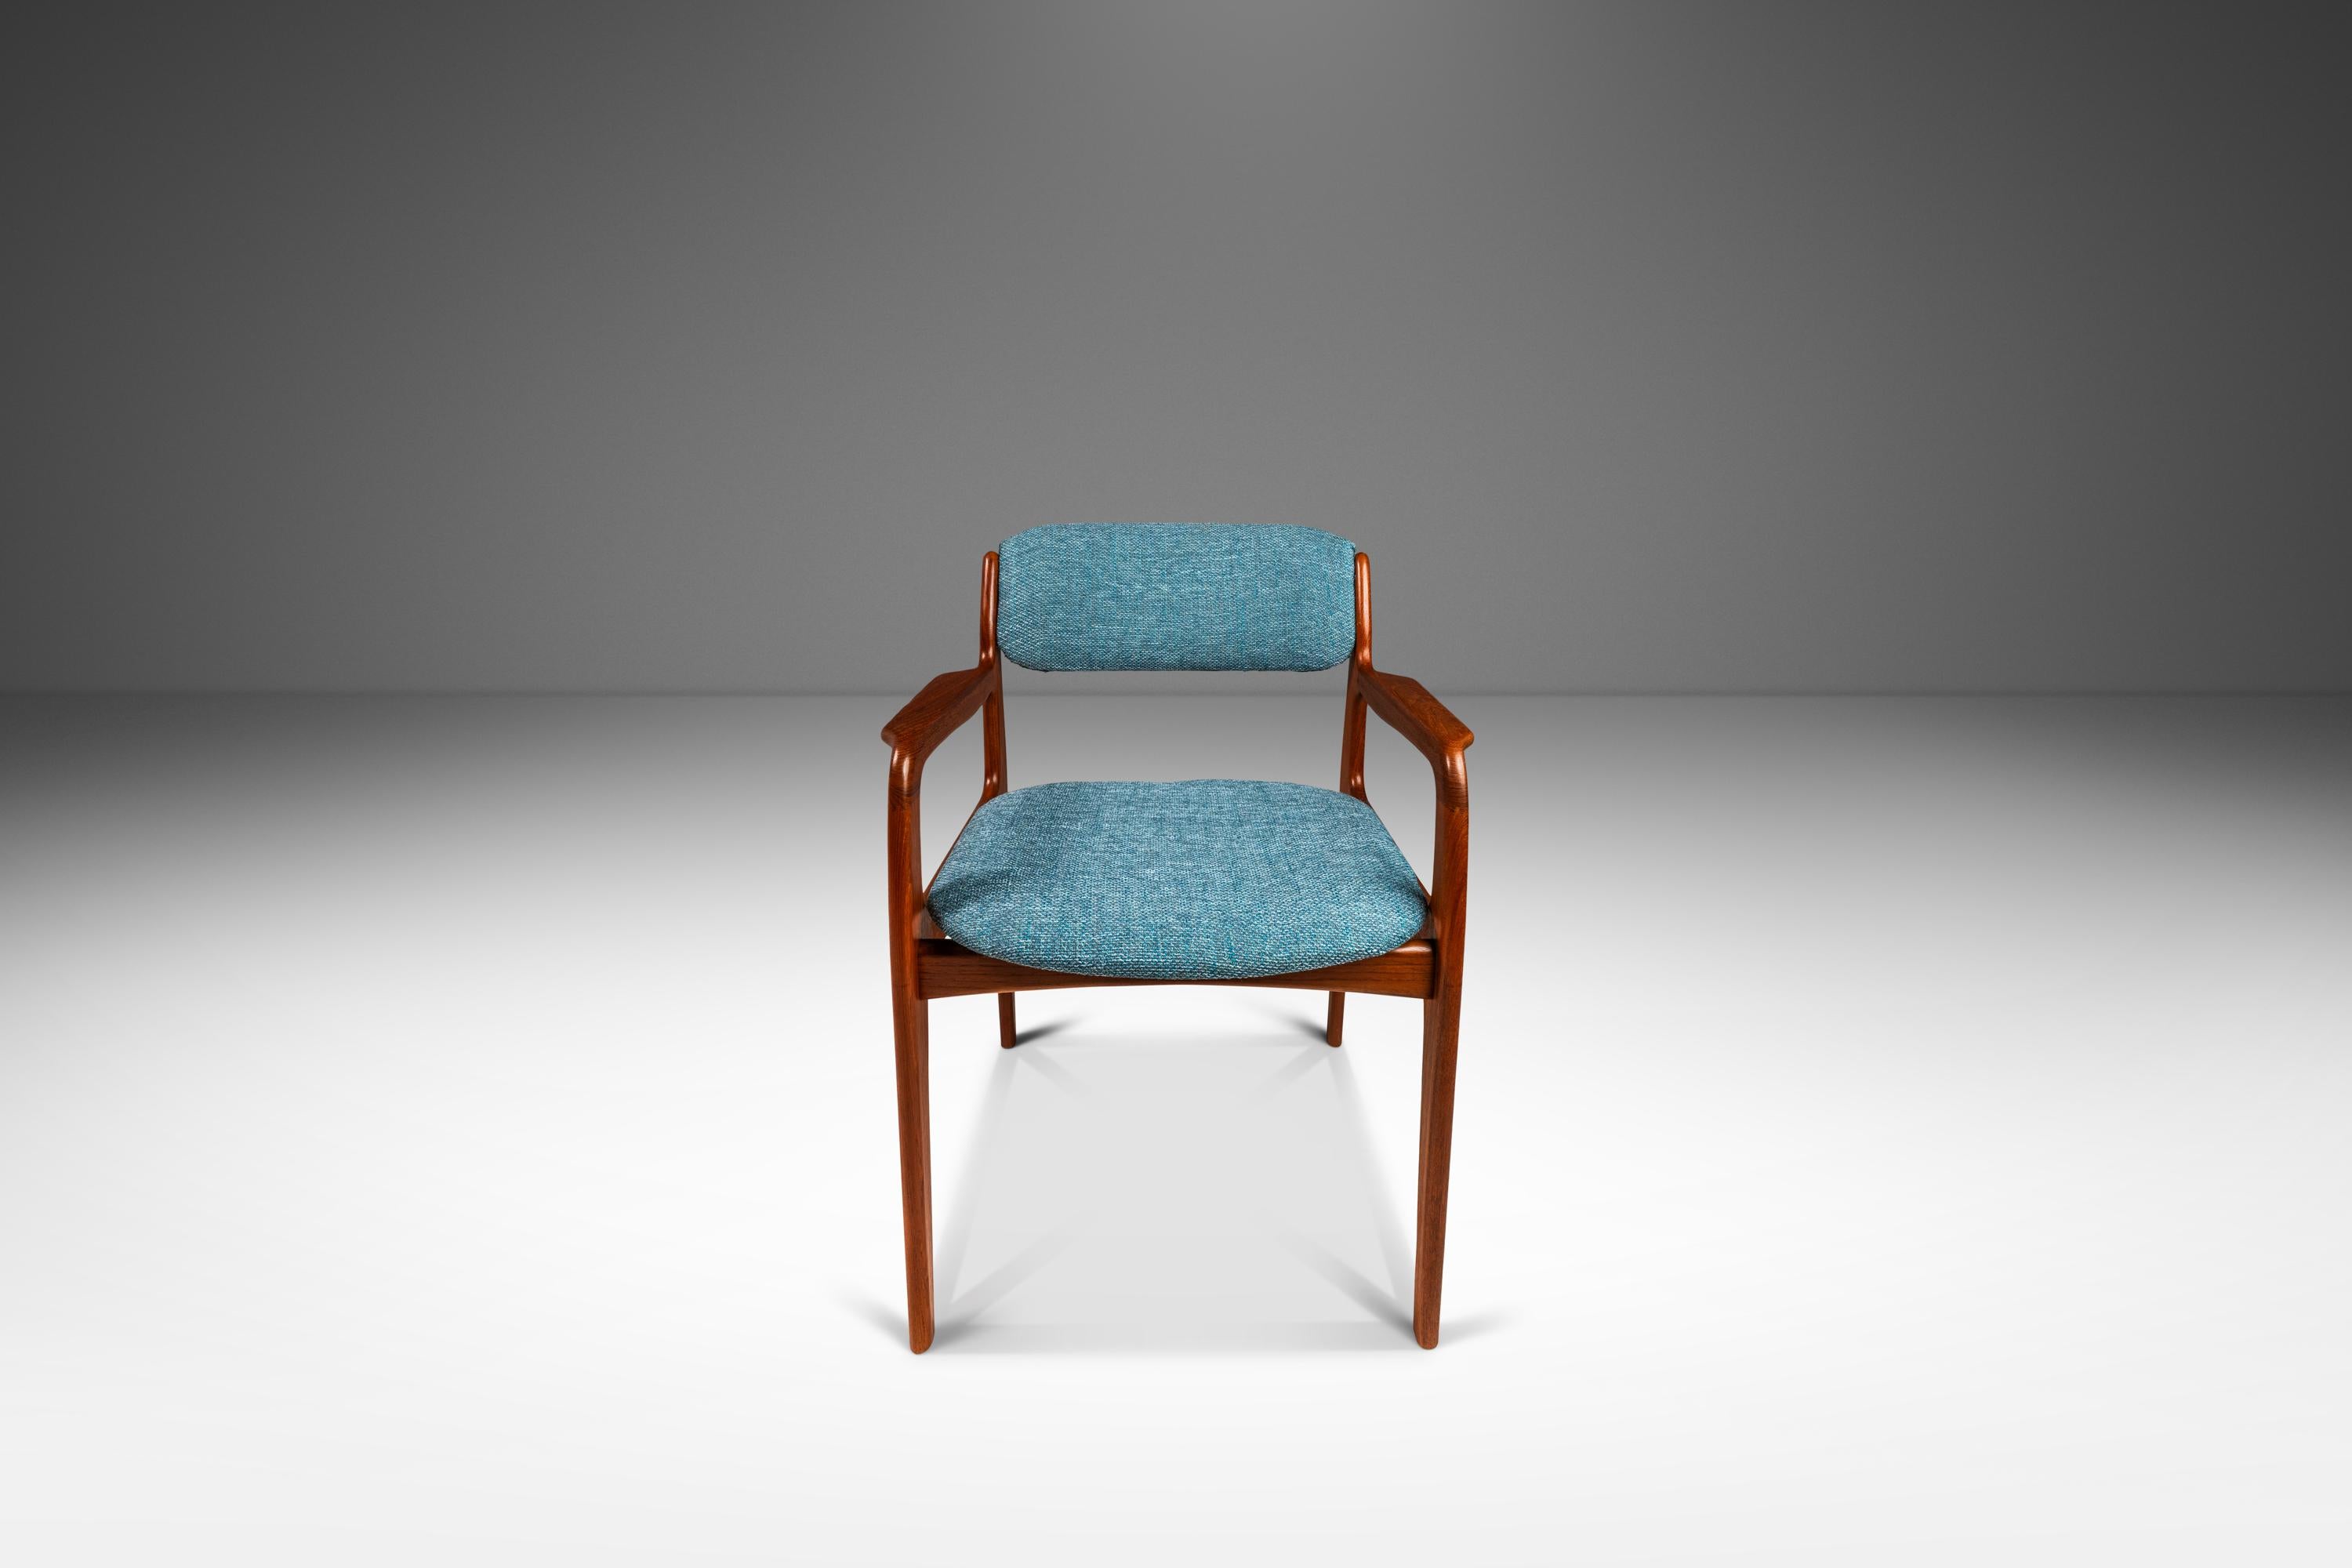 Fabric Dining / Desk / Chair in Solid Teak & New Upholstery by Benny Linden, c. 1980s For Sale